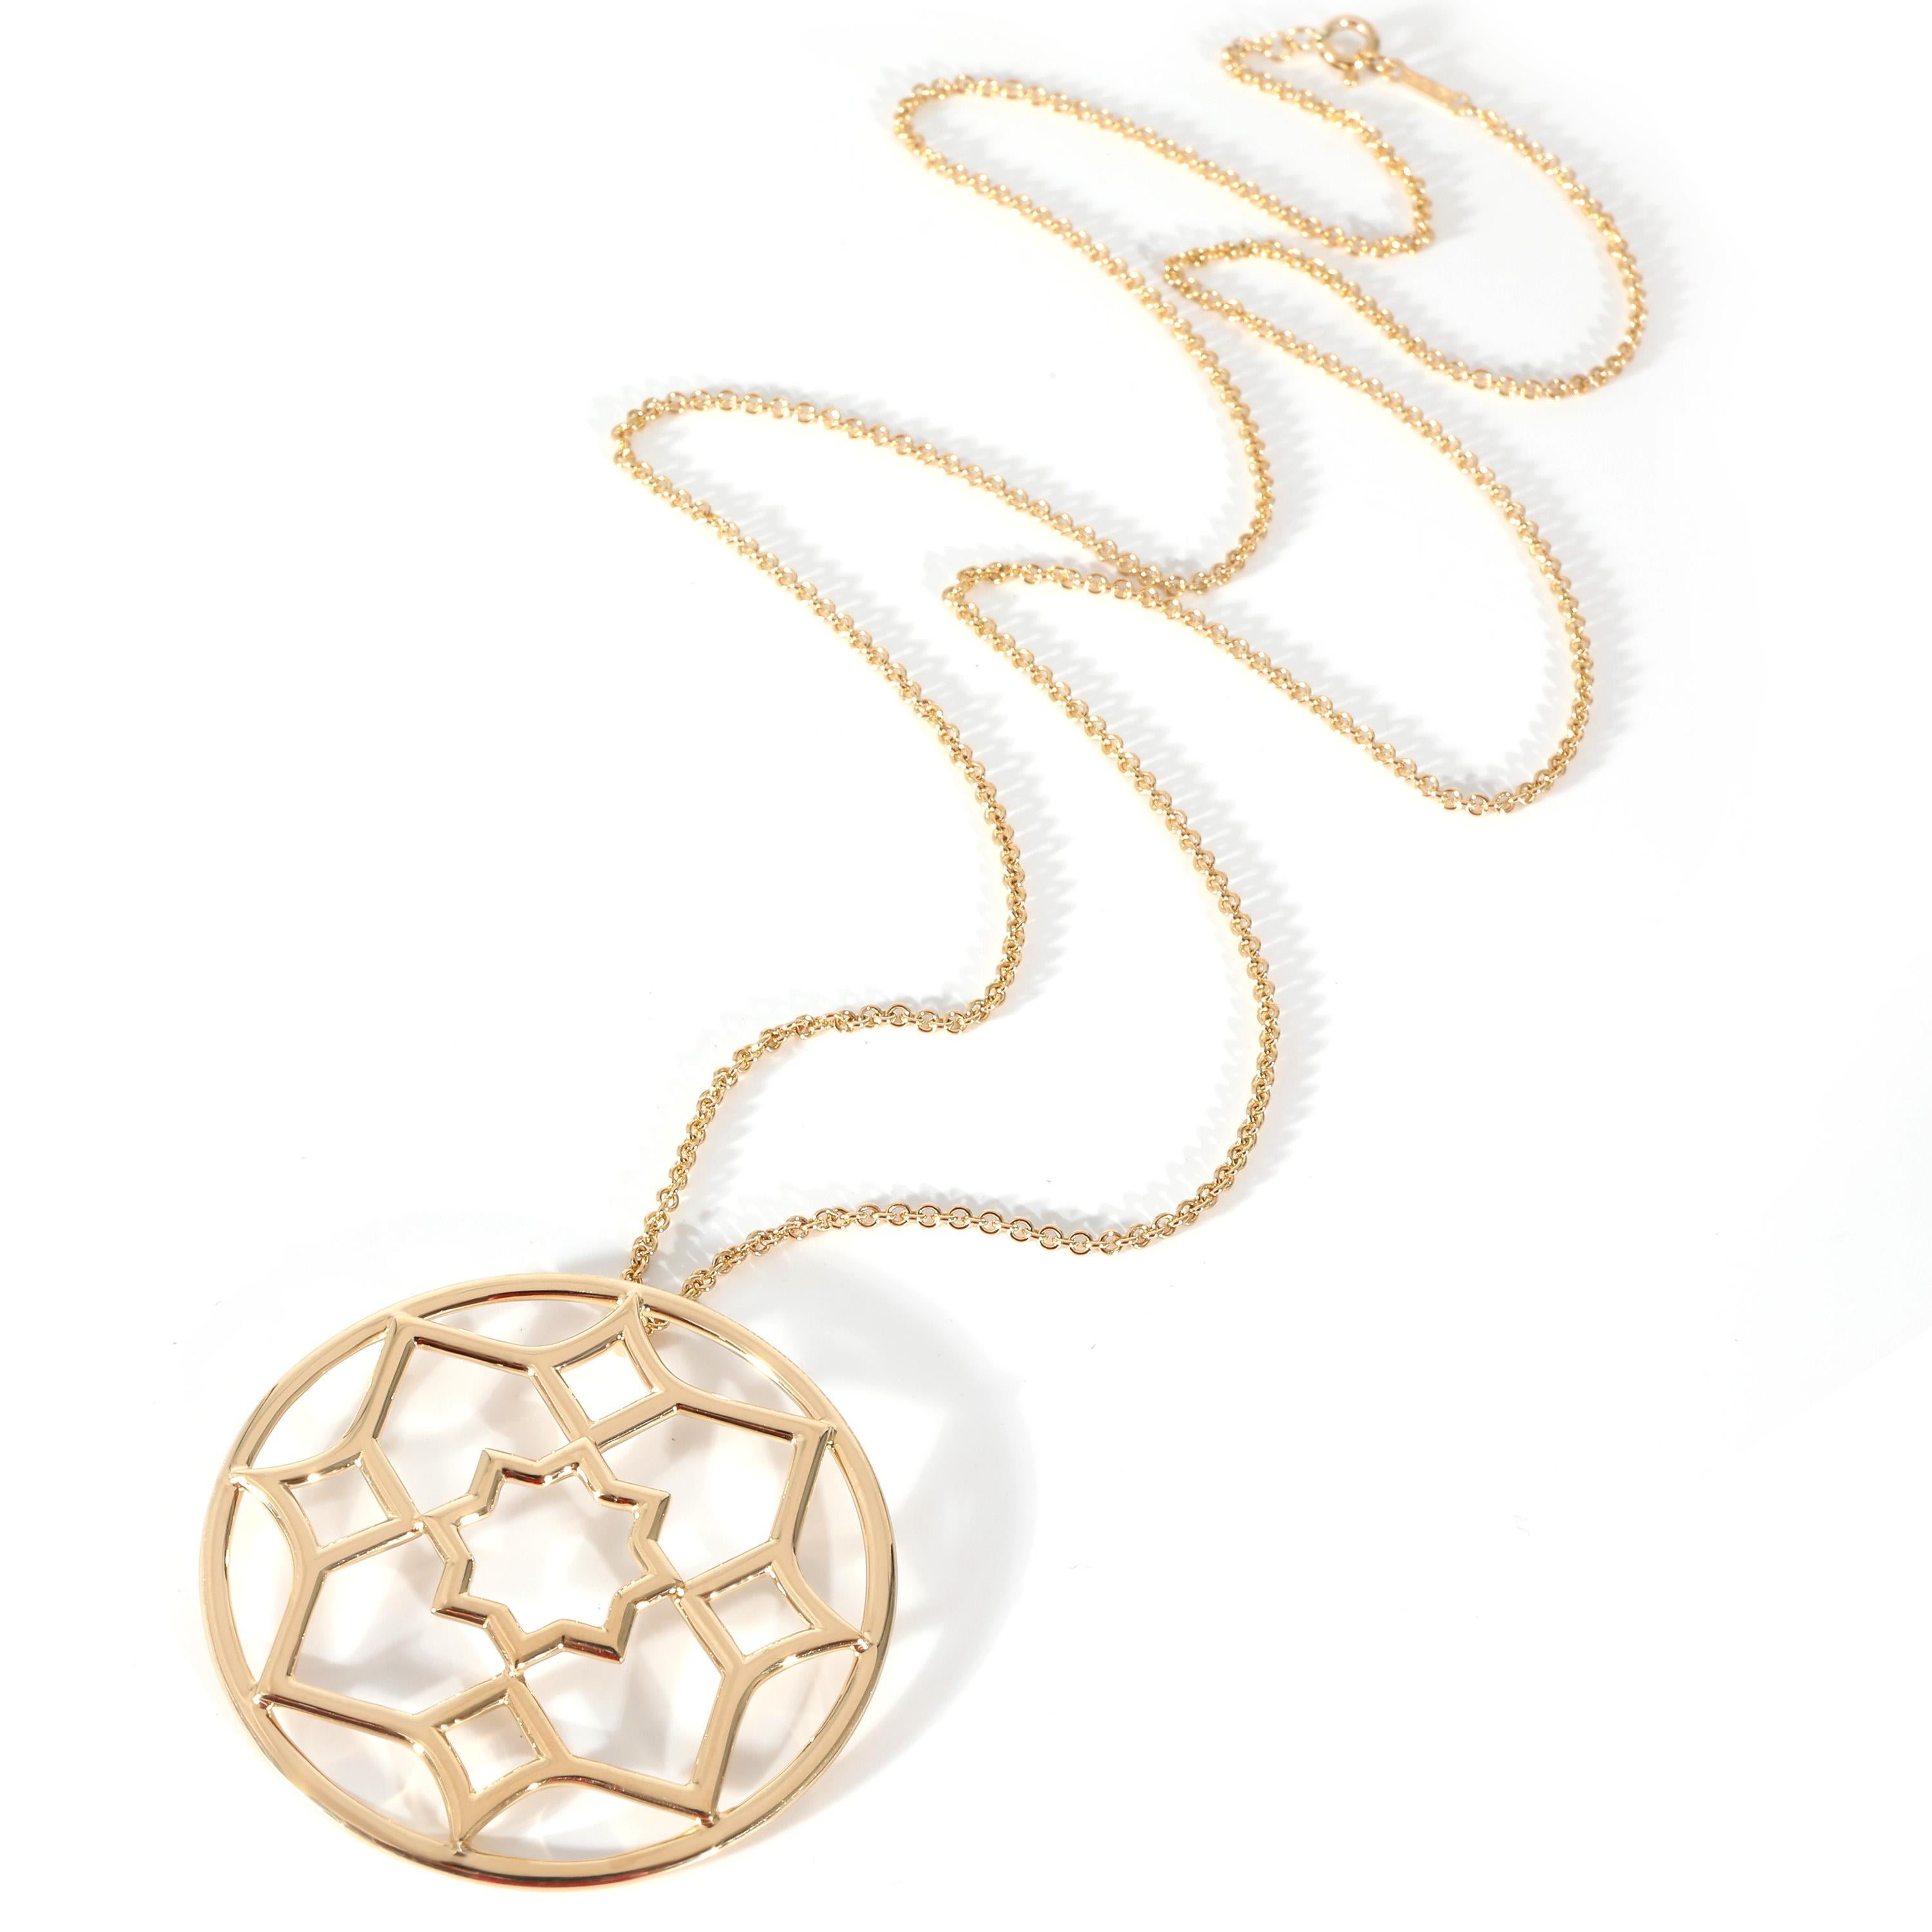 Tiffany & Co. Paloma Picasso Marrakesh Large Pendant in 18k Yellow Gold

PRIMARY DETAILS
SKU: 133370
Listing Title: Tiffany & Co. Paloma Picasso Marrakesh Large Pendant in 18k Yellow Gold
Condition Description: The daughter of artist Pablo Picasso